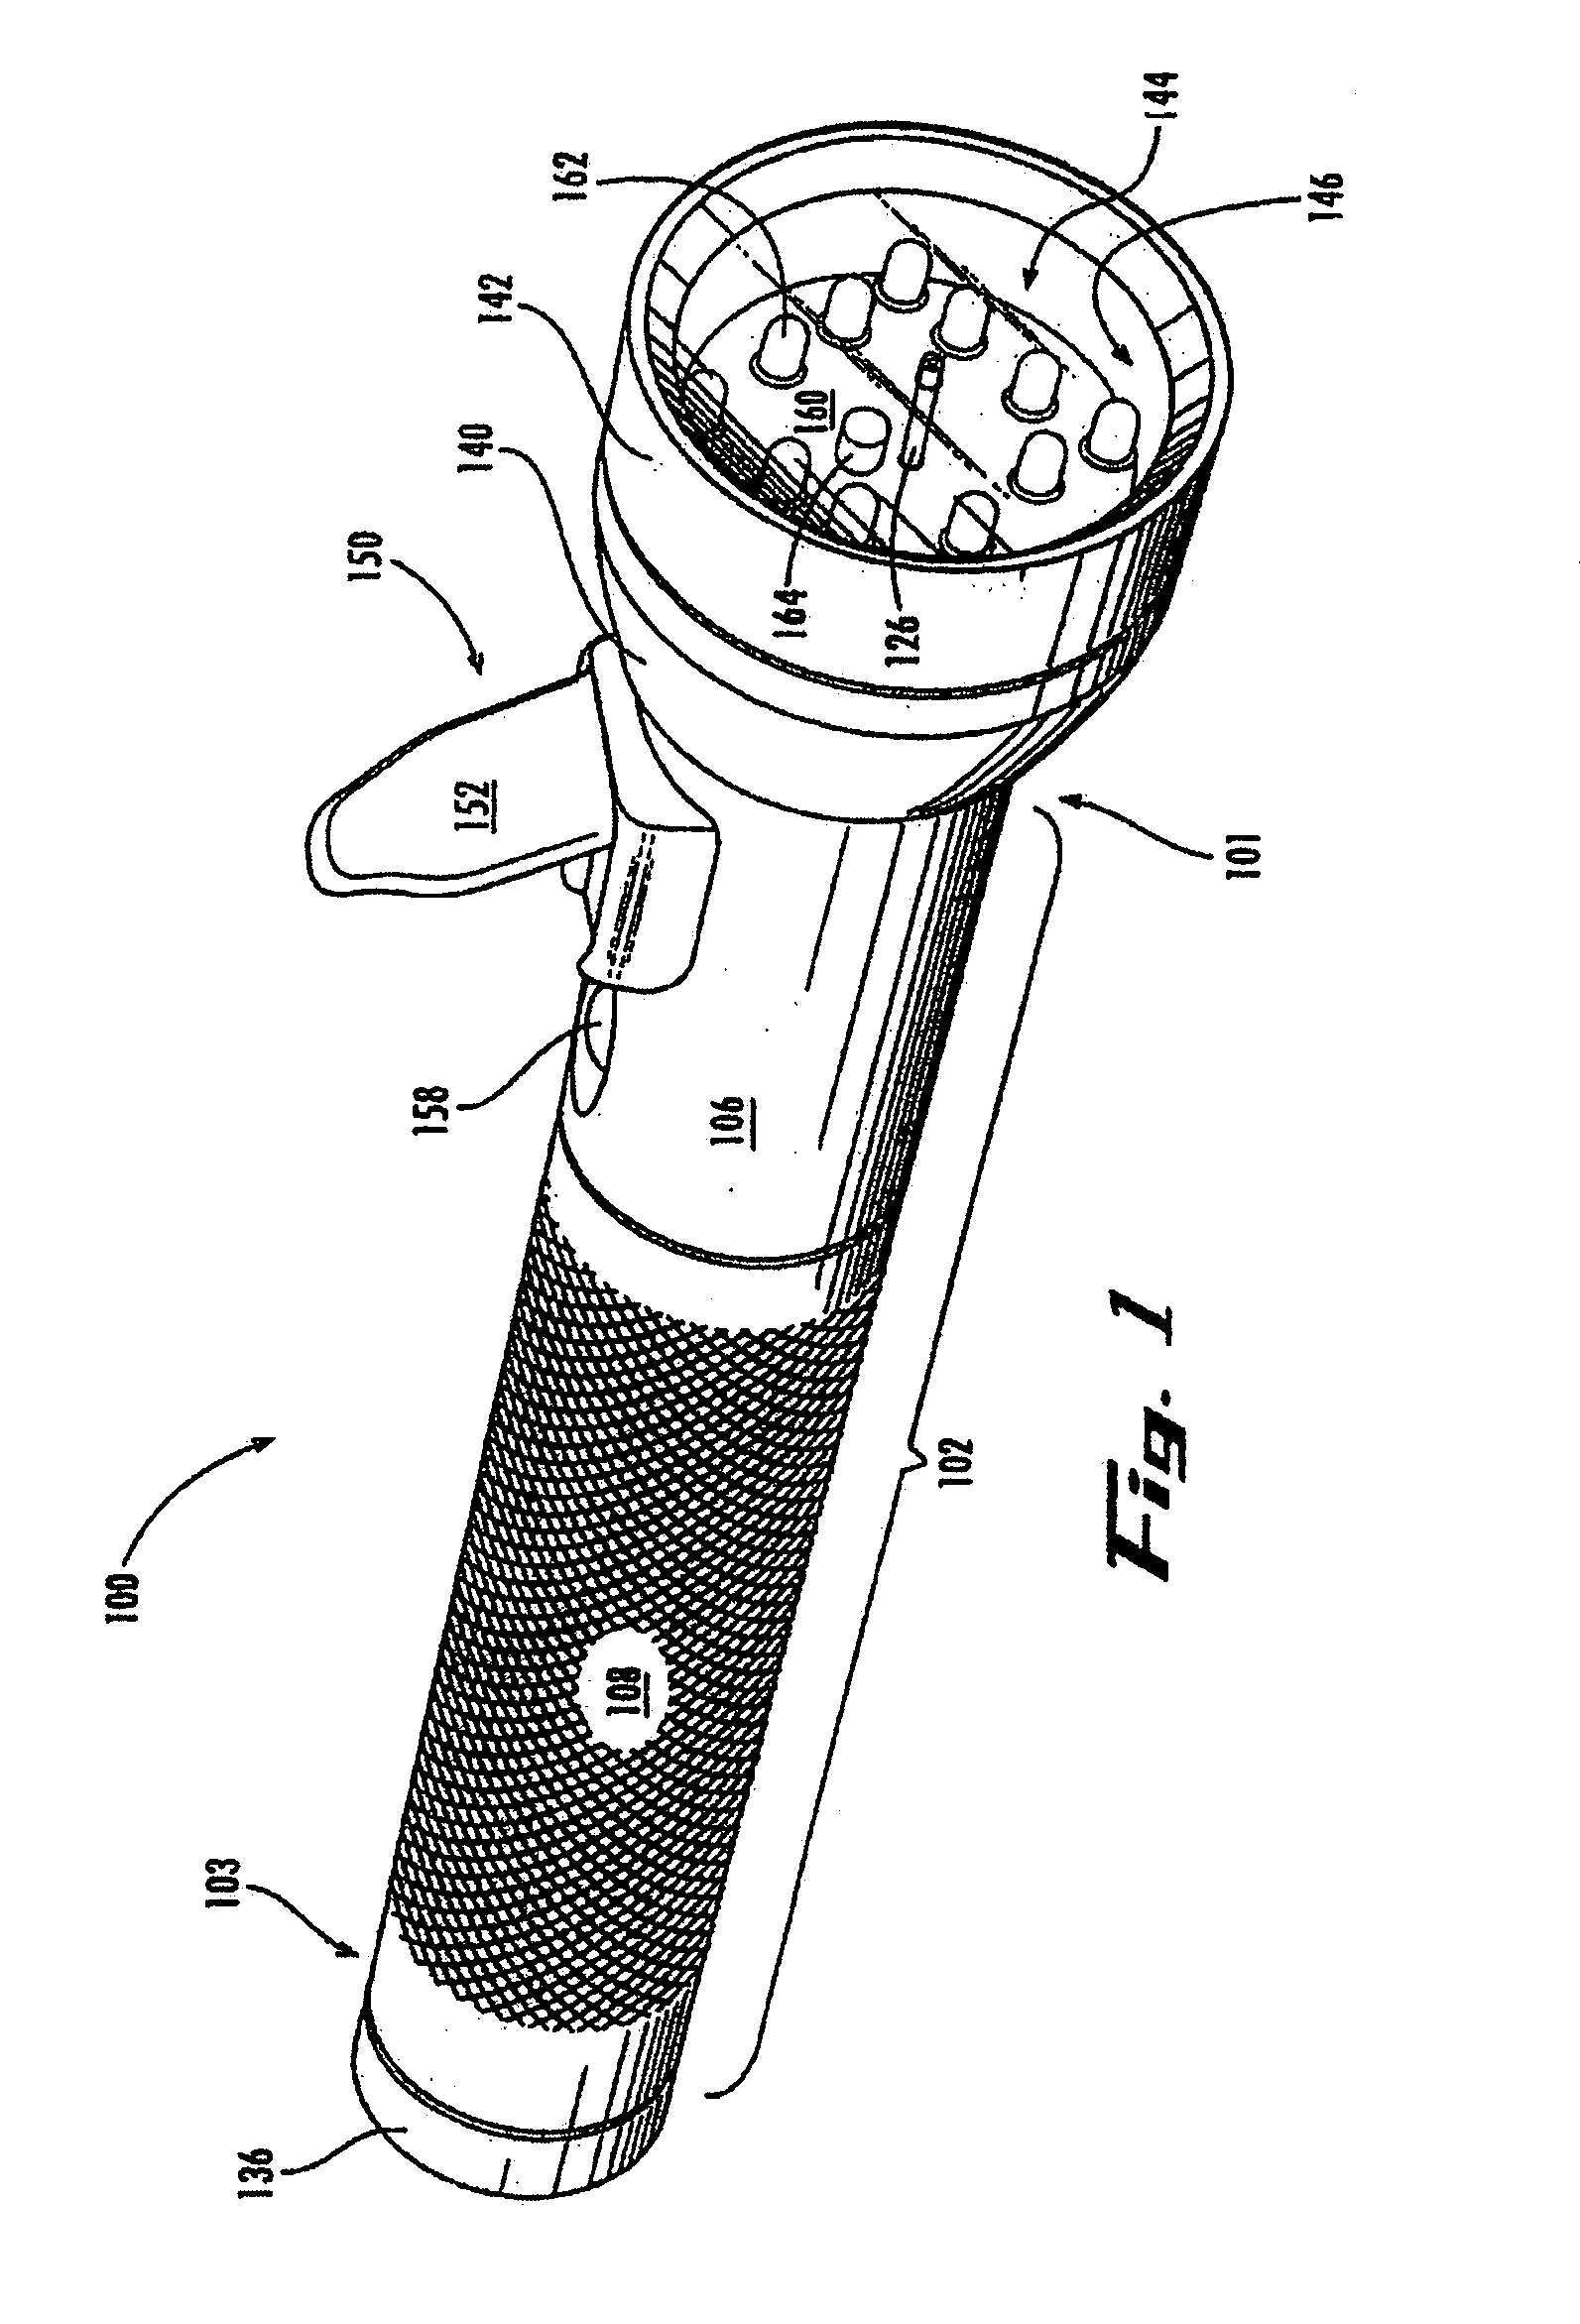 Flashlight and canister interconnection system and method